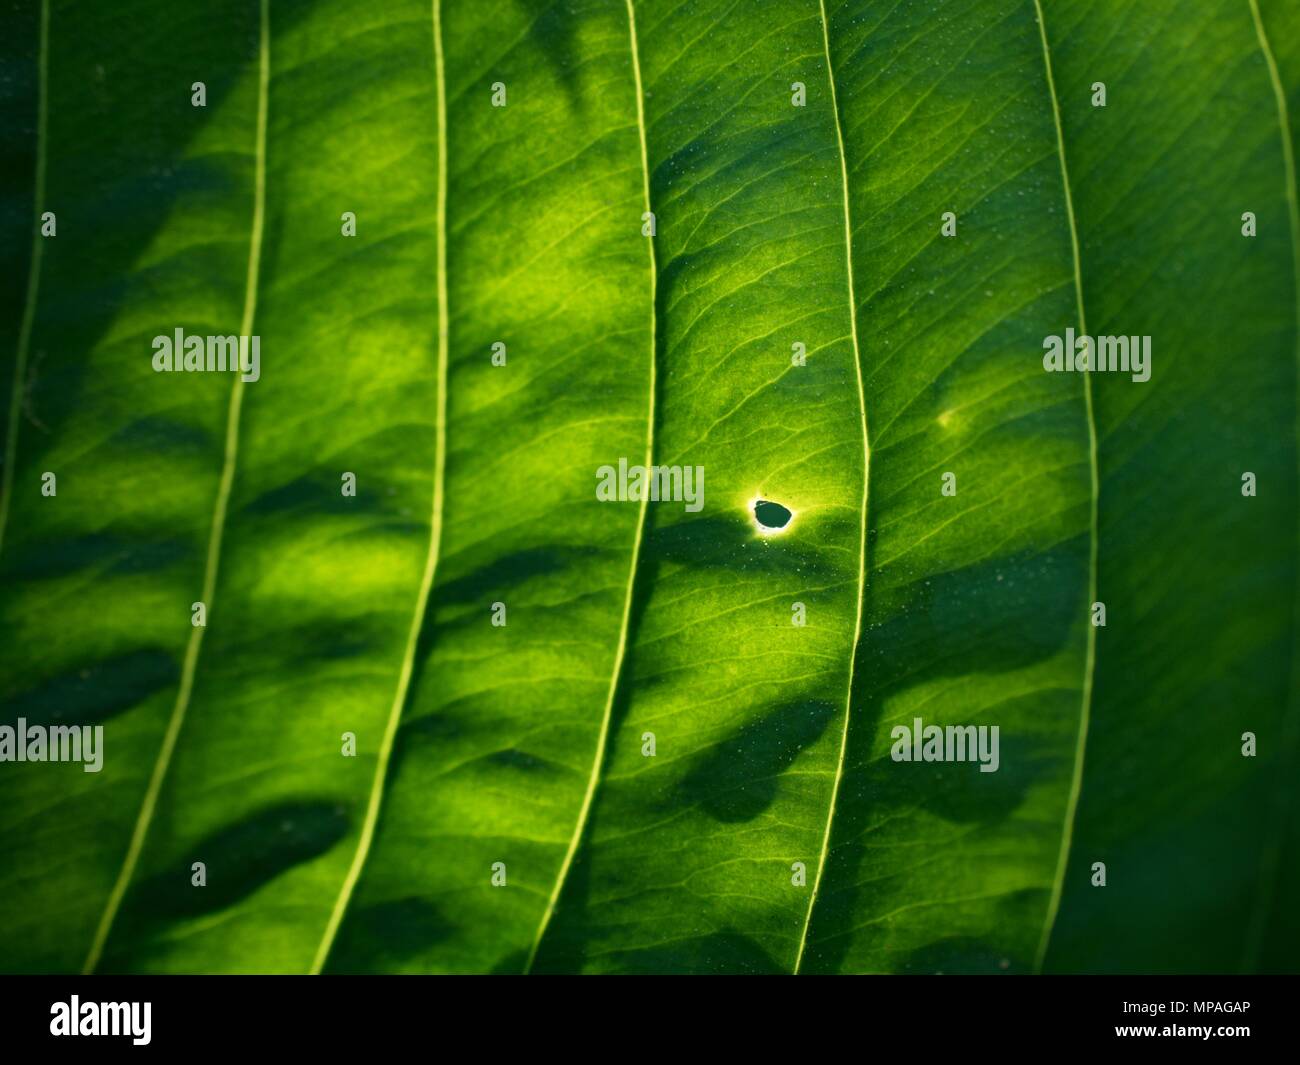 Leaf contour of the hostа plan, lush foliage. Dark green colored leaves of a plant. The hosta in the garden Stock Photo